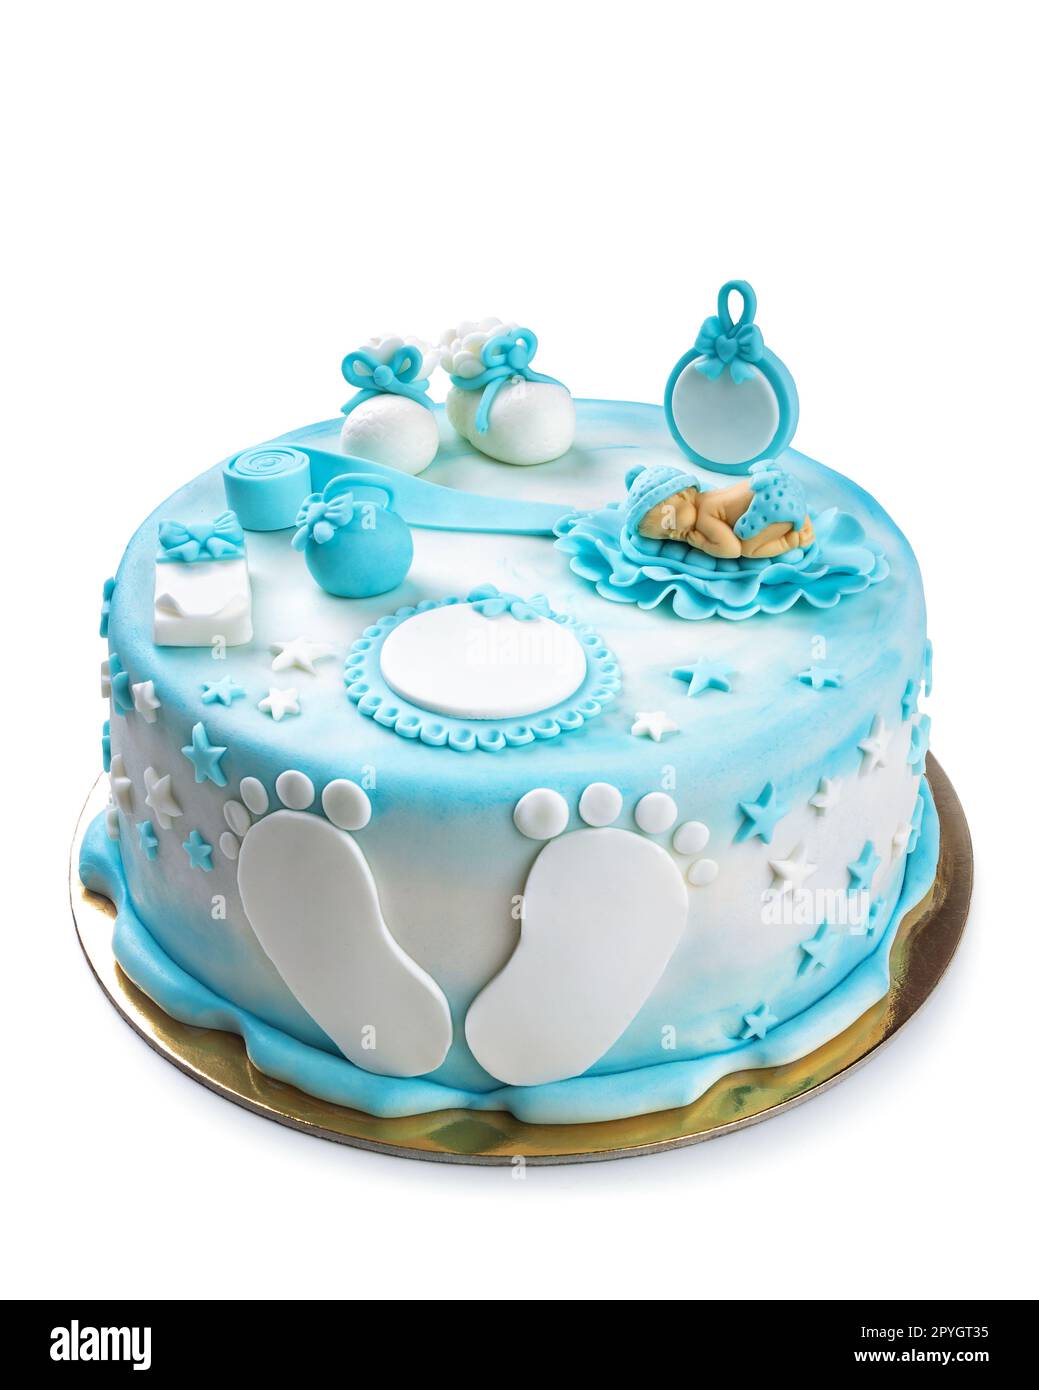 White and blue colored cake for a baby's birthday Stock Photo